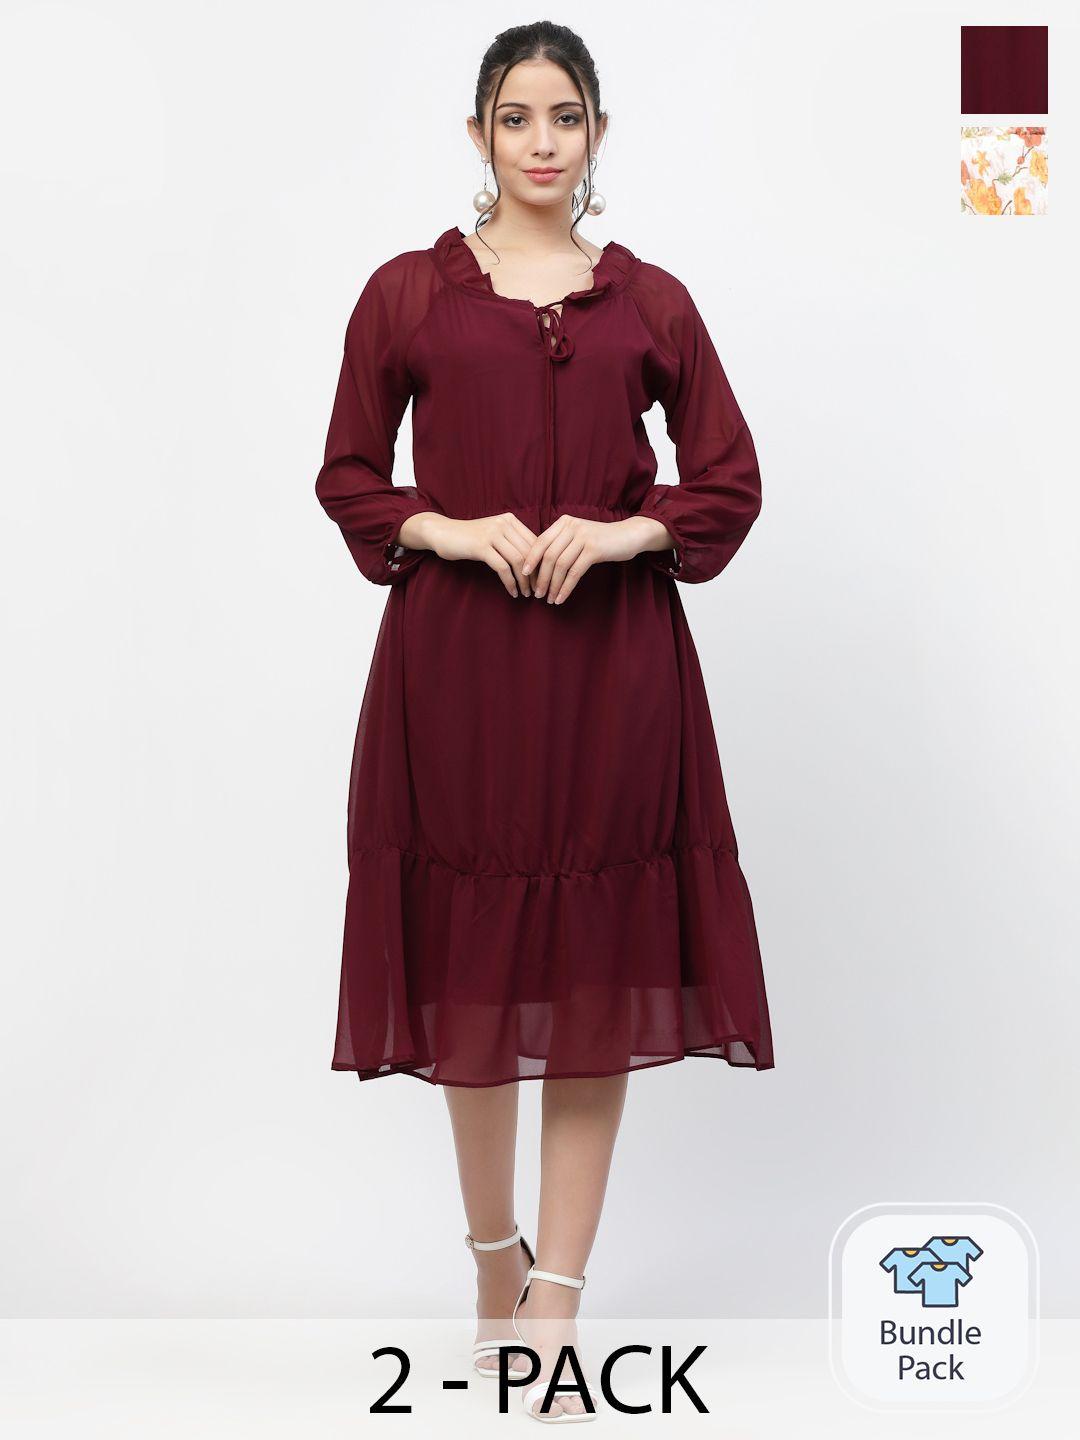 miss-ayse-pack-of-2-maroon-&-white-fit-&-flare-dresses